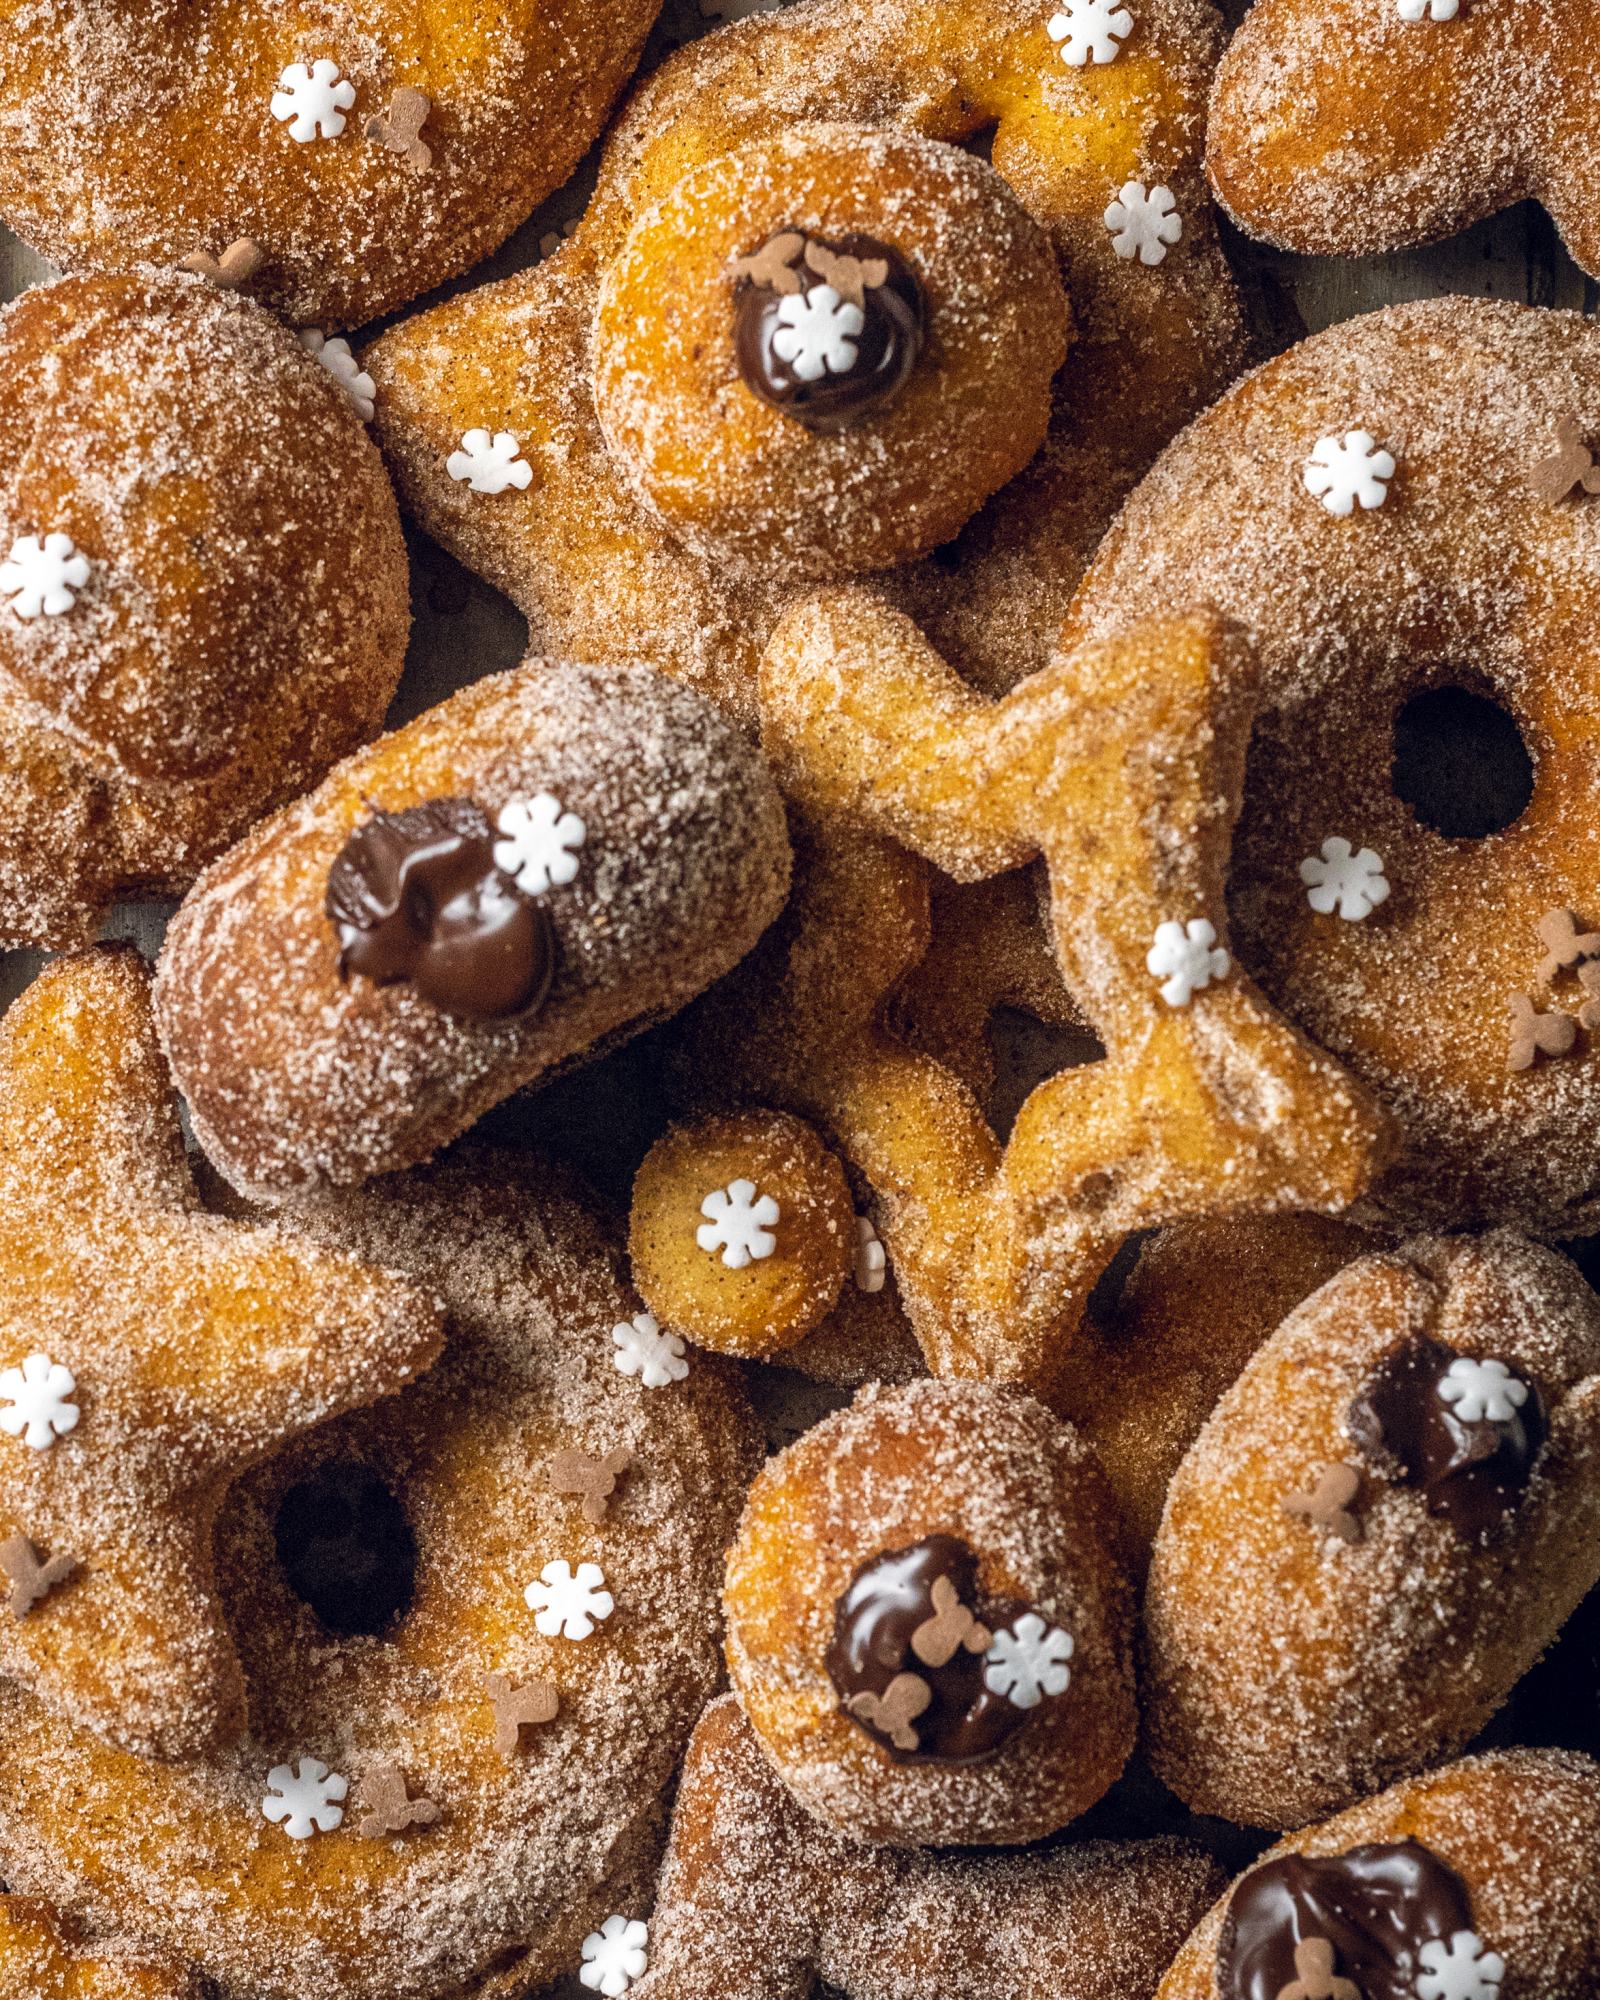 A selection of vegan cinnamon donuts of different shapes and sizes, all of them coated with cinnamon sugar.